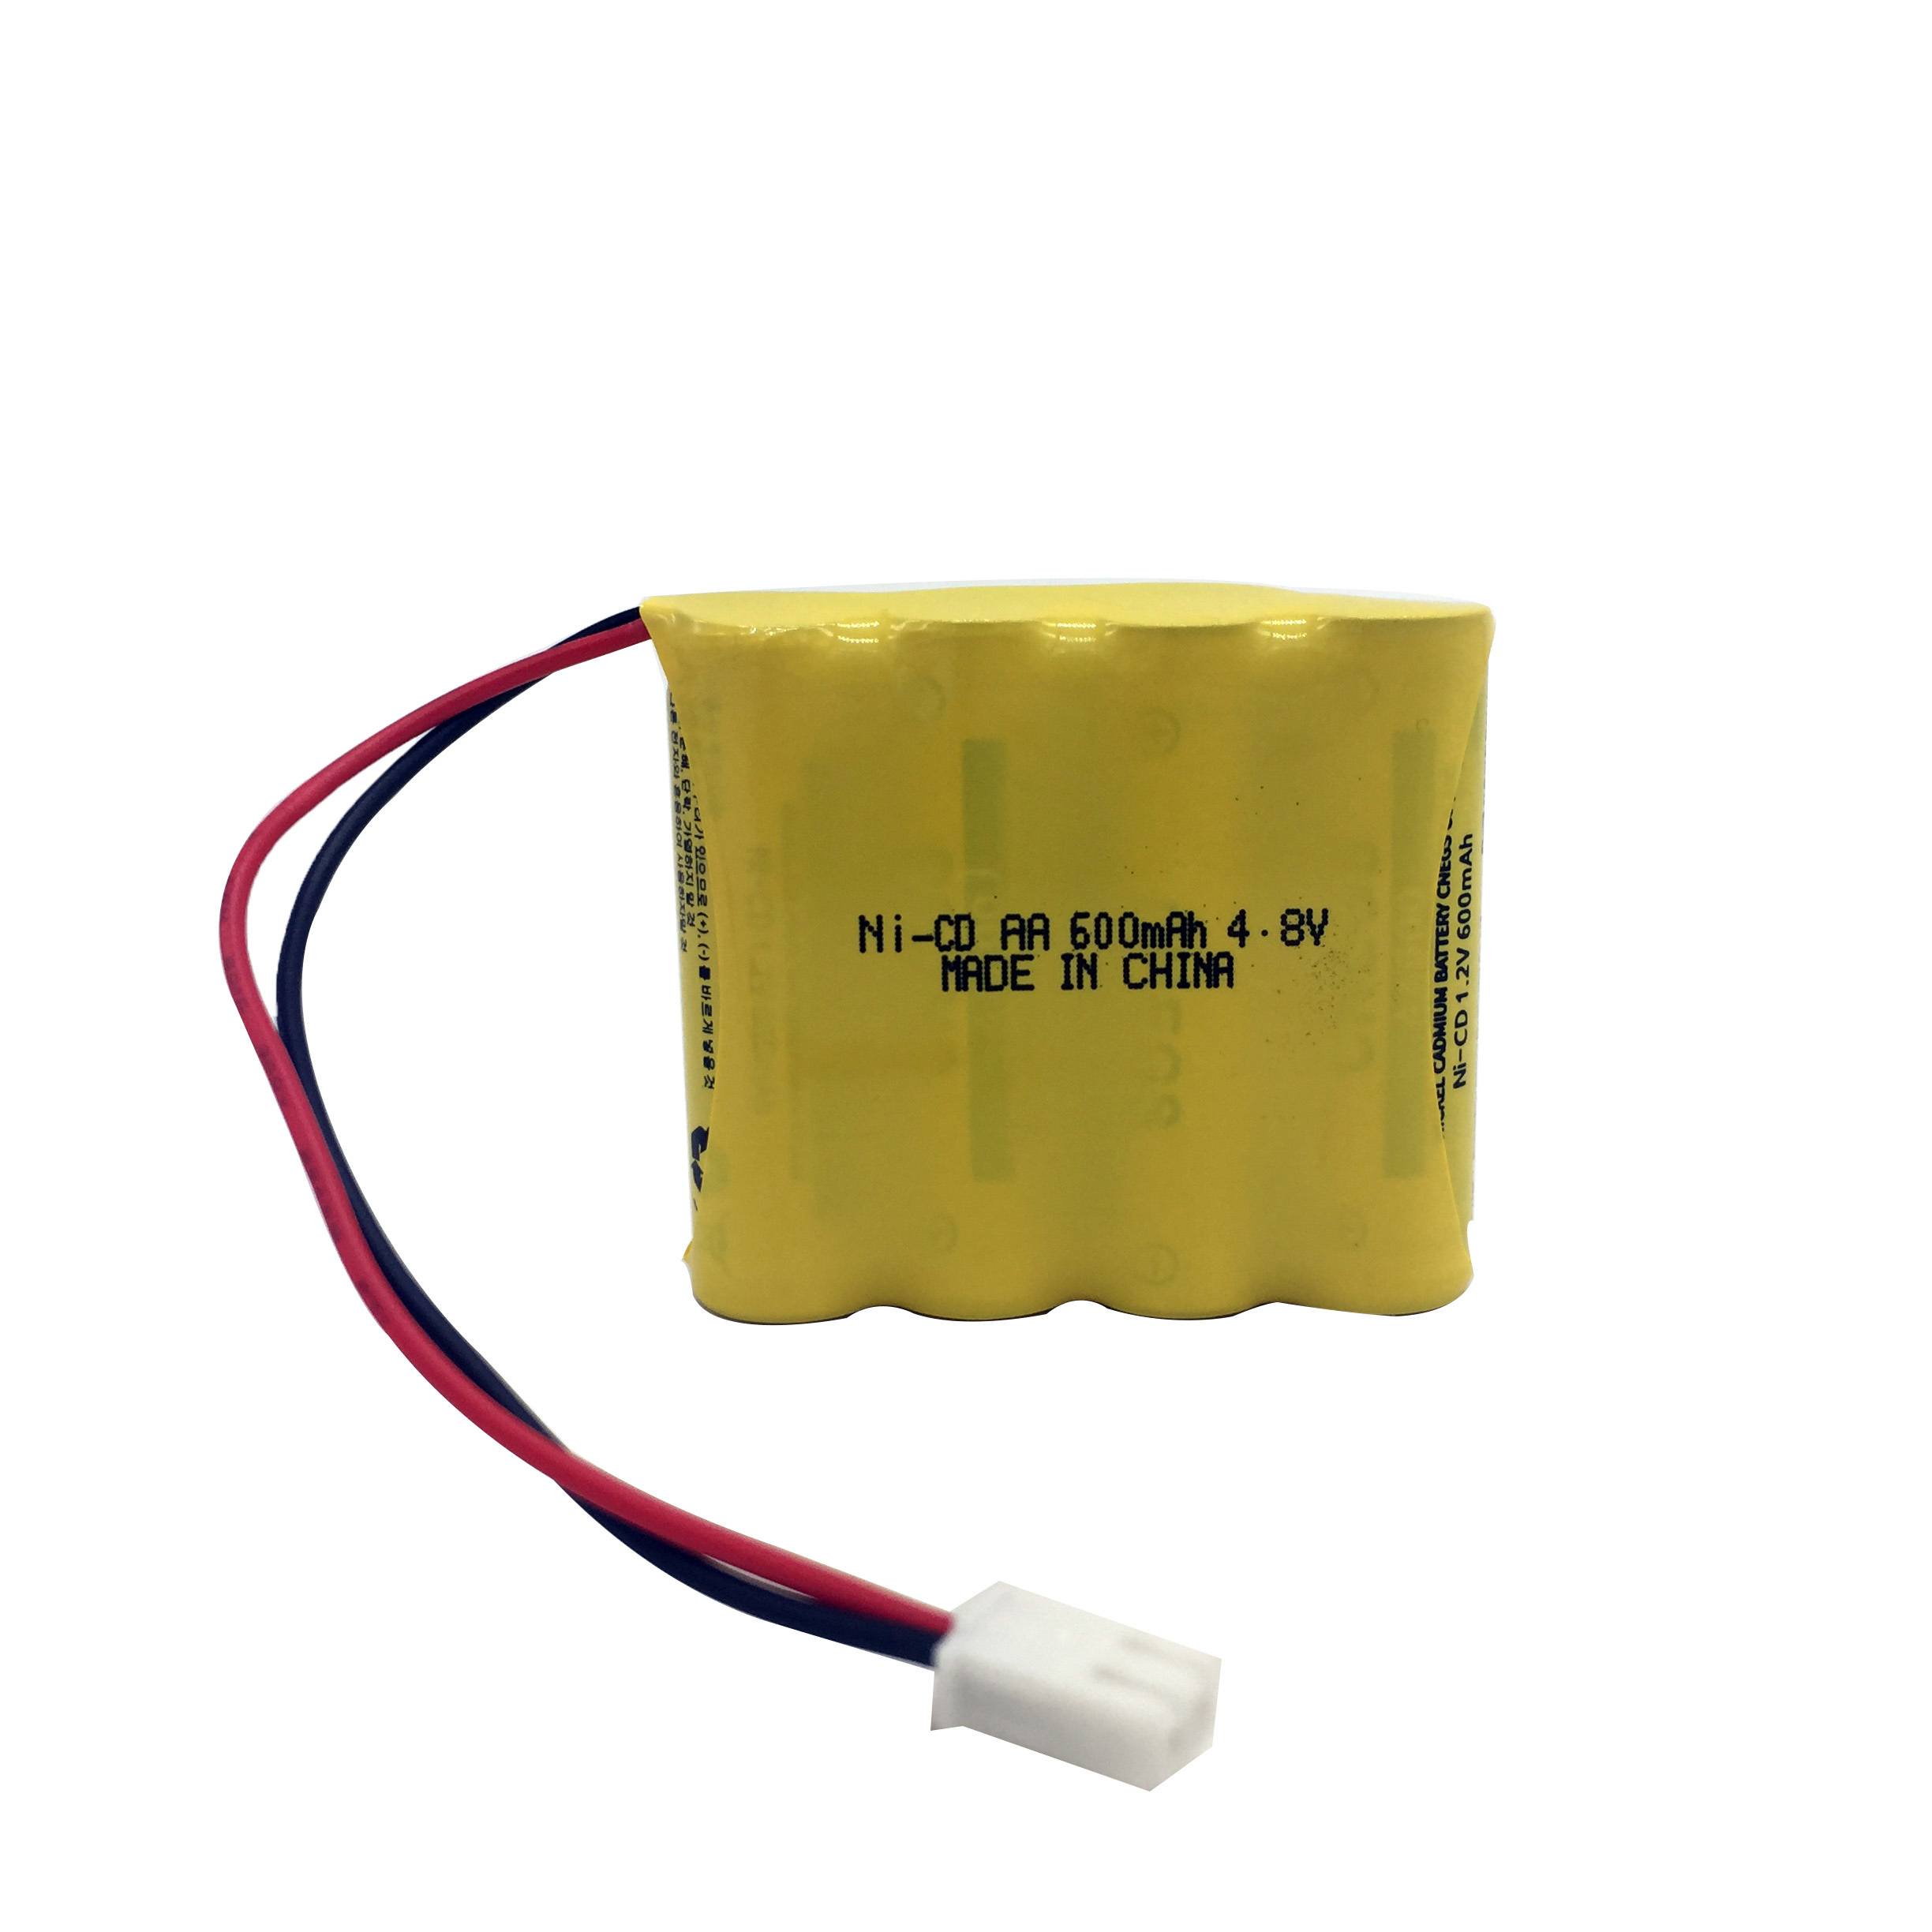 4.8V 600mAh AA battery pack NiCd rechargeable battery for Emergency light Fire control light